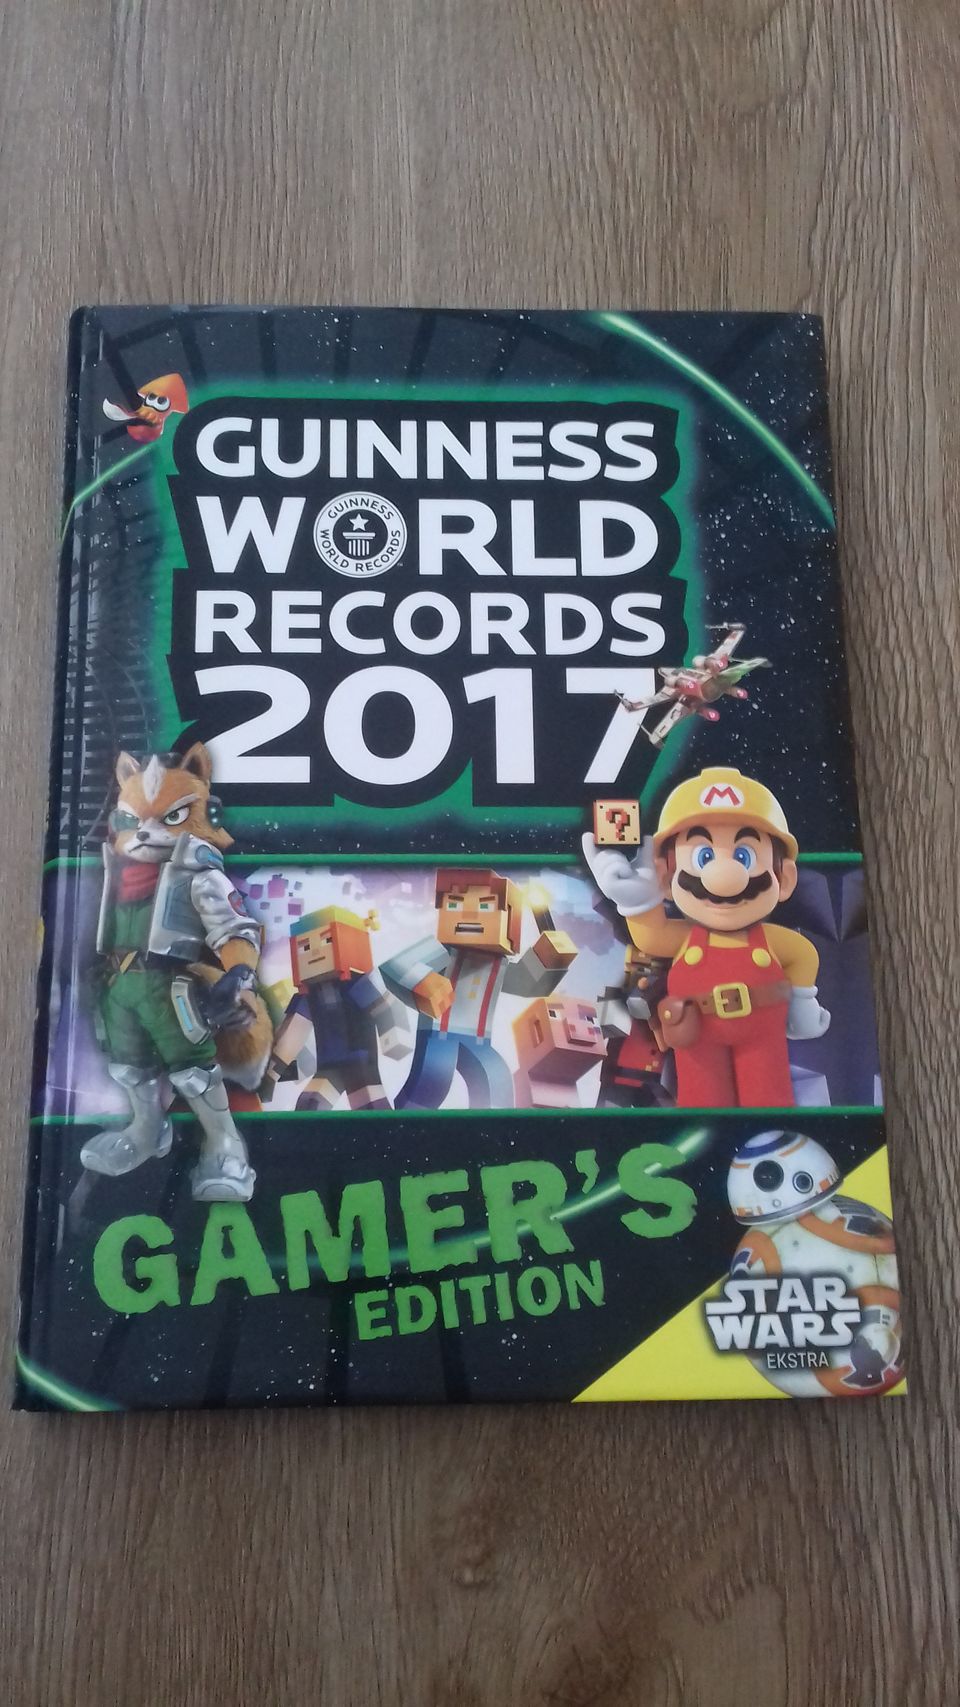 Guinness World Record - Gamer's Edition 2017